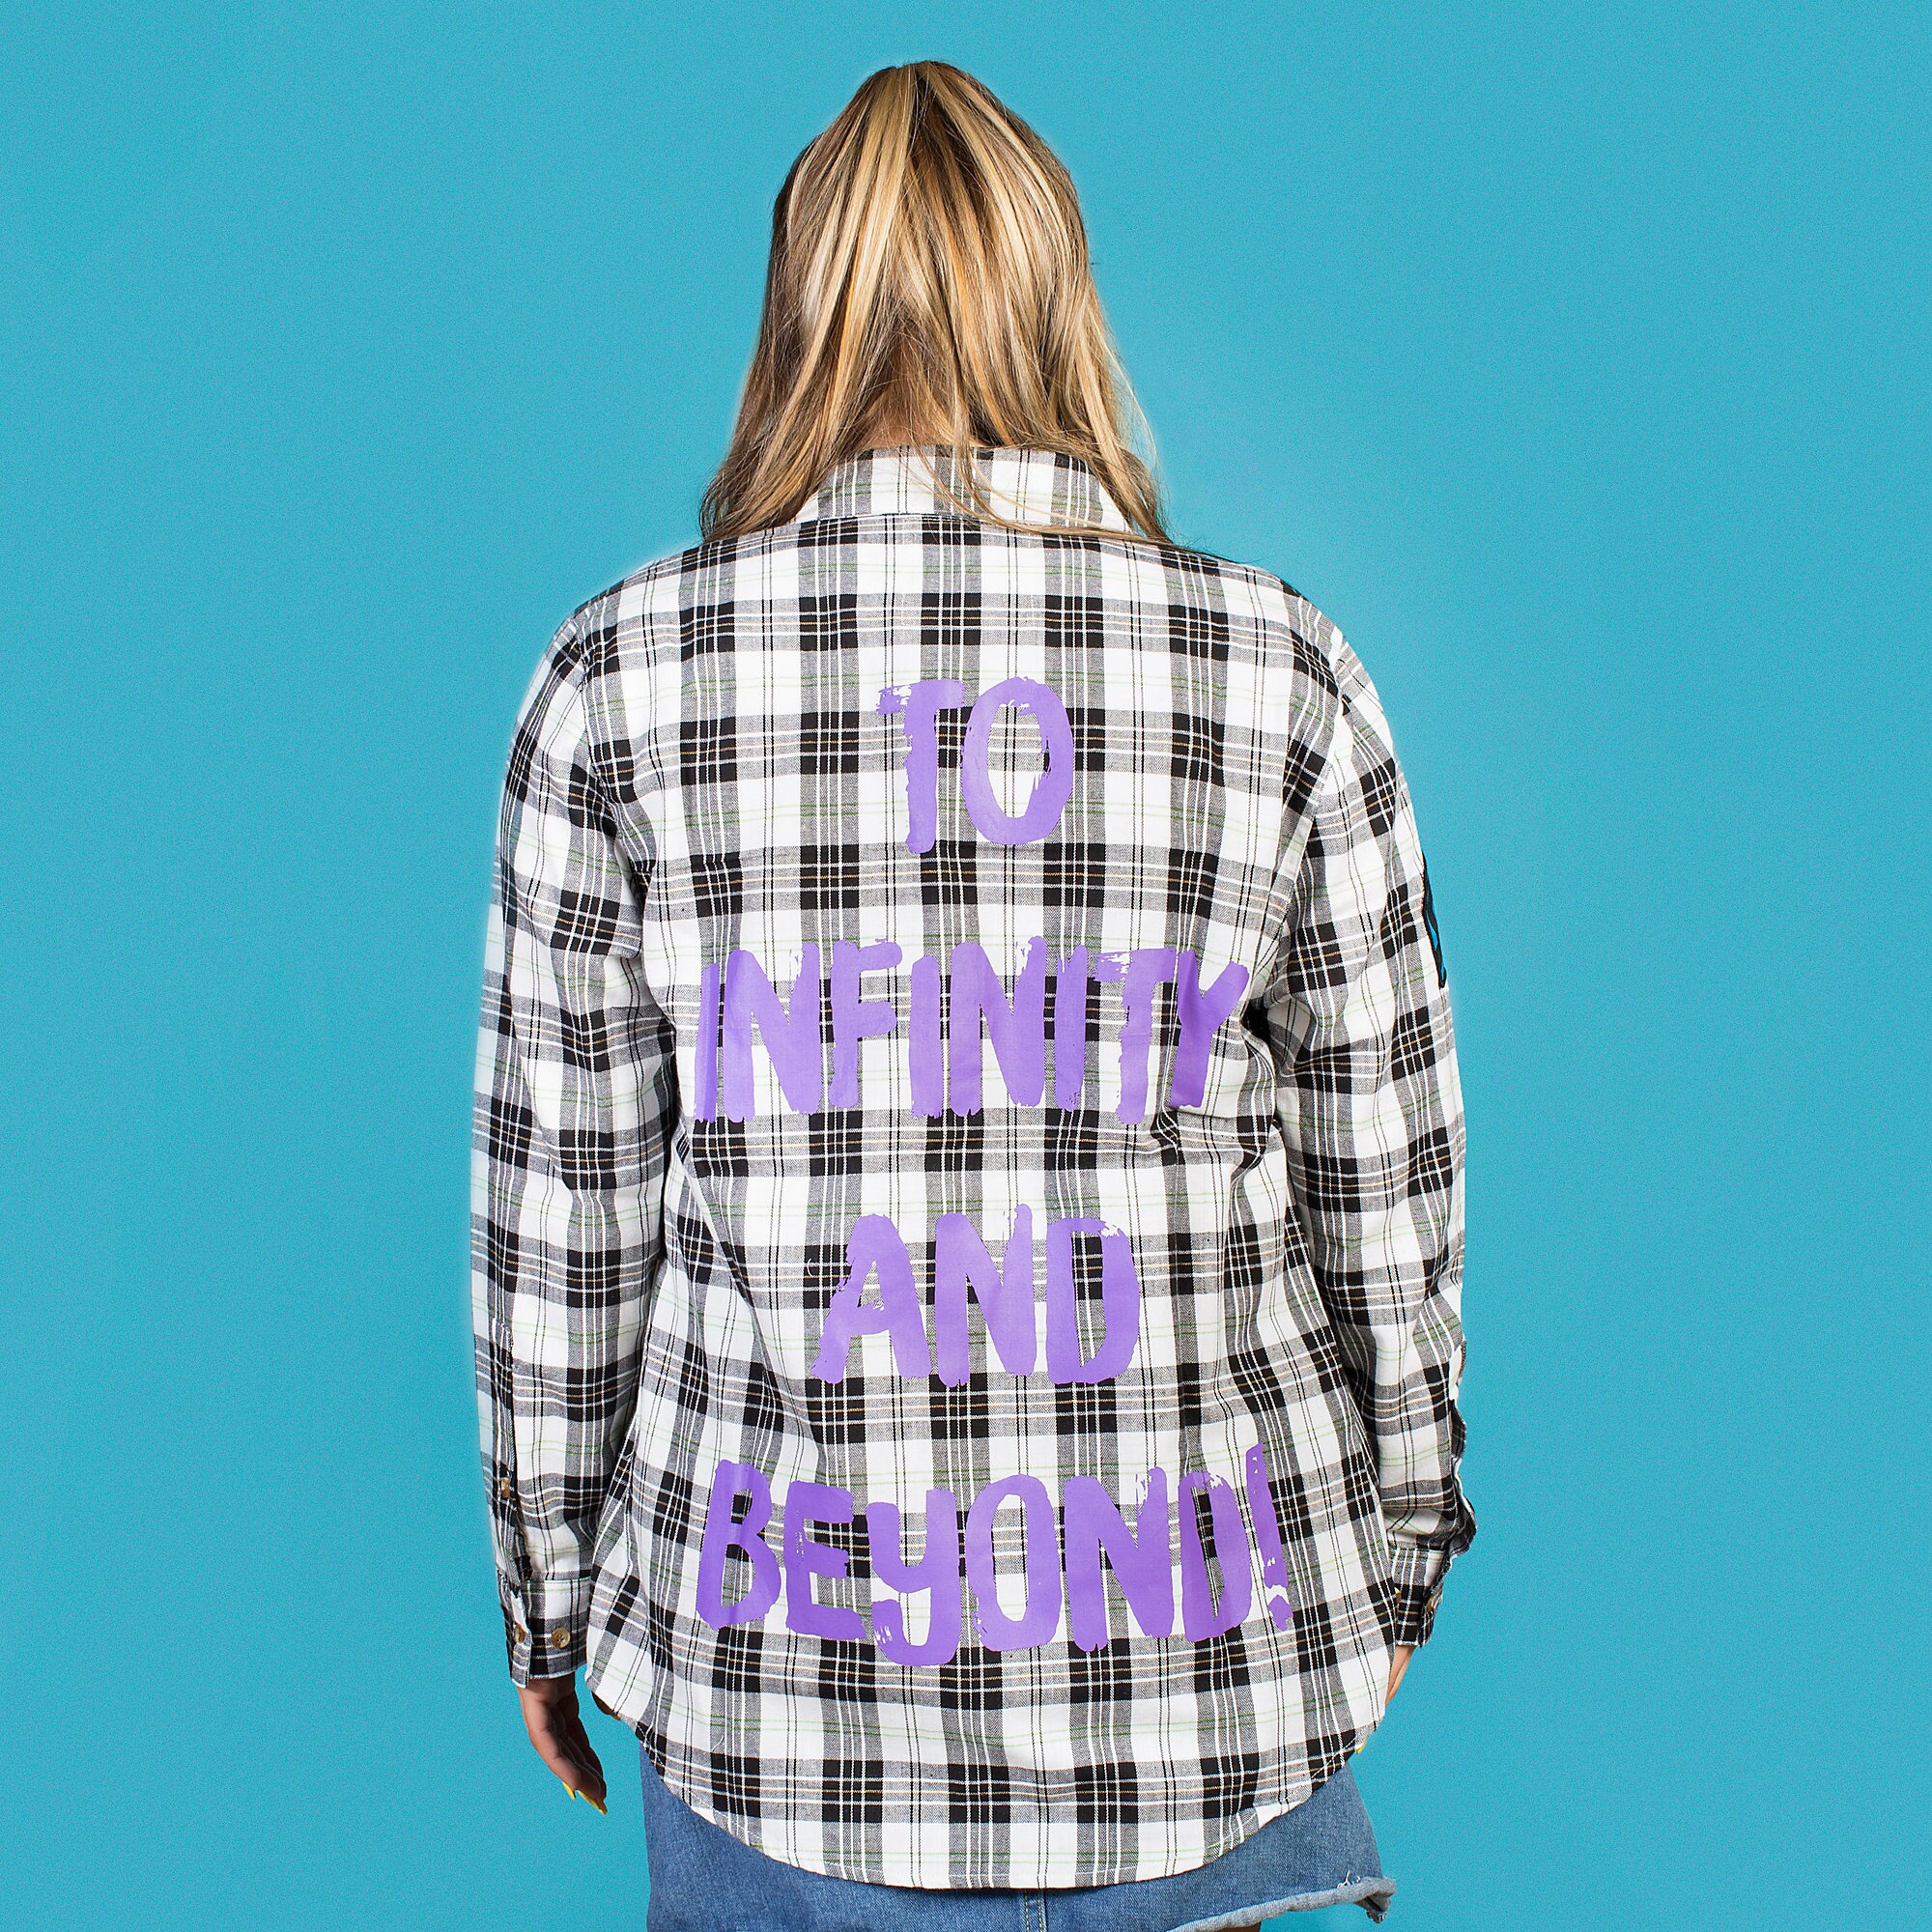 Buzz Lightyear Flannel Shirt for Adults by Cakeworthy - Toy Story 4